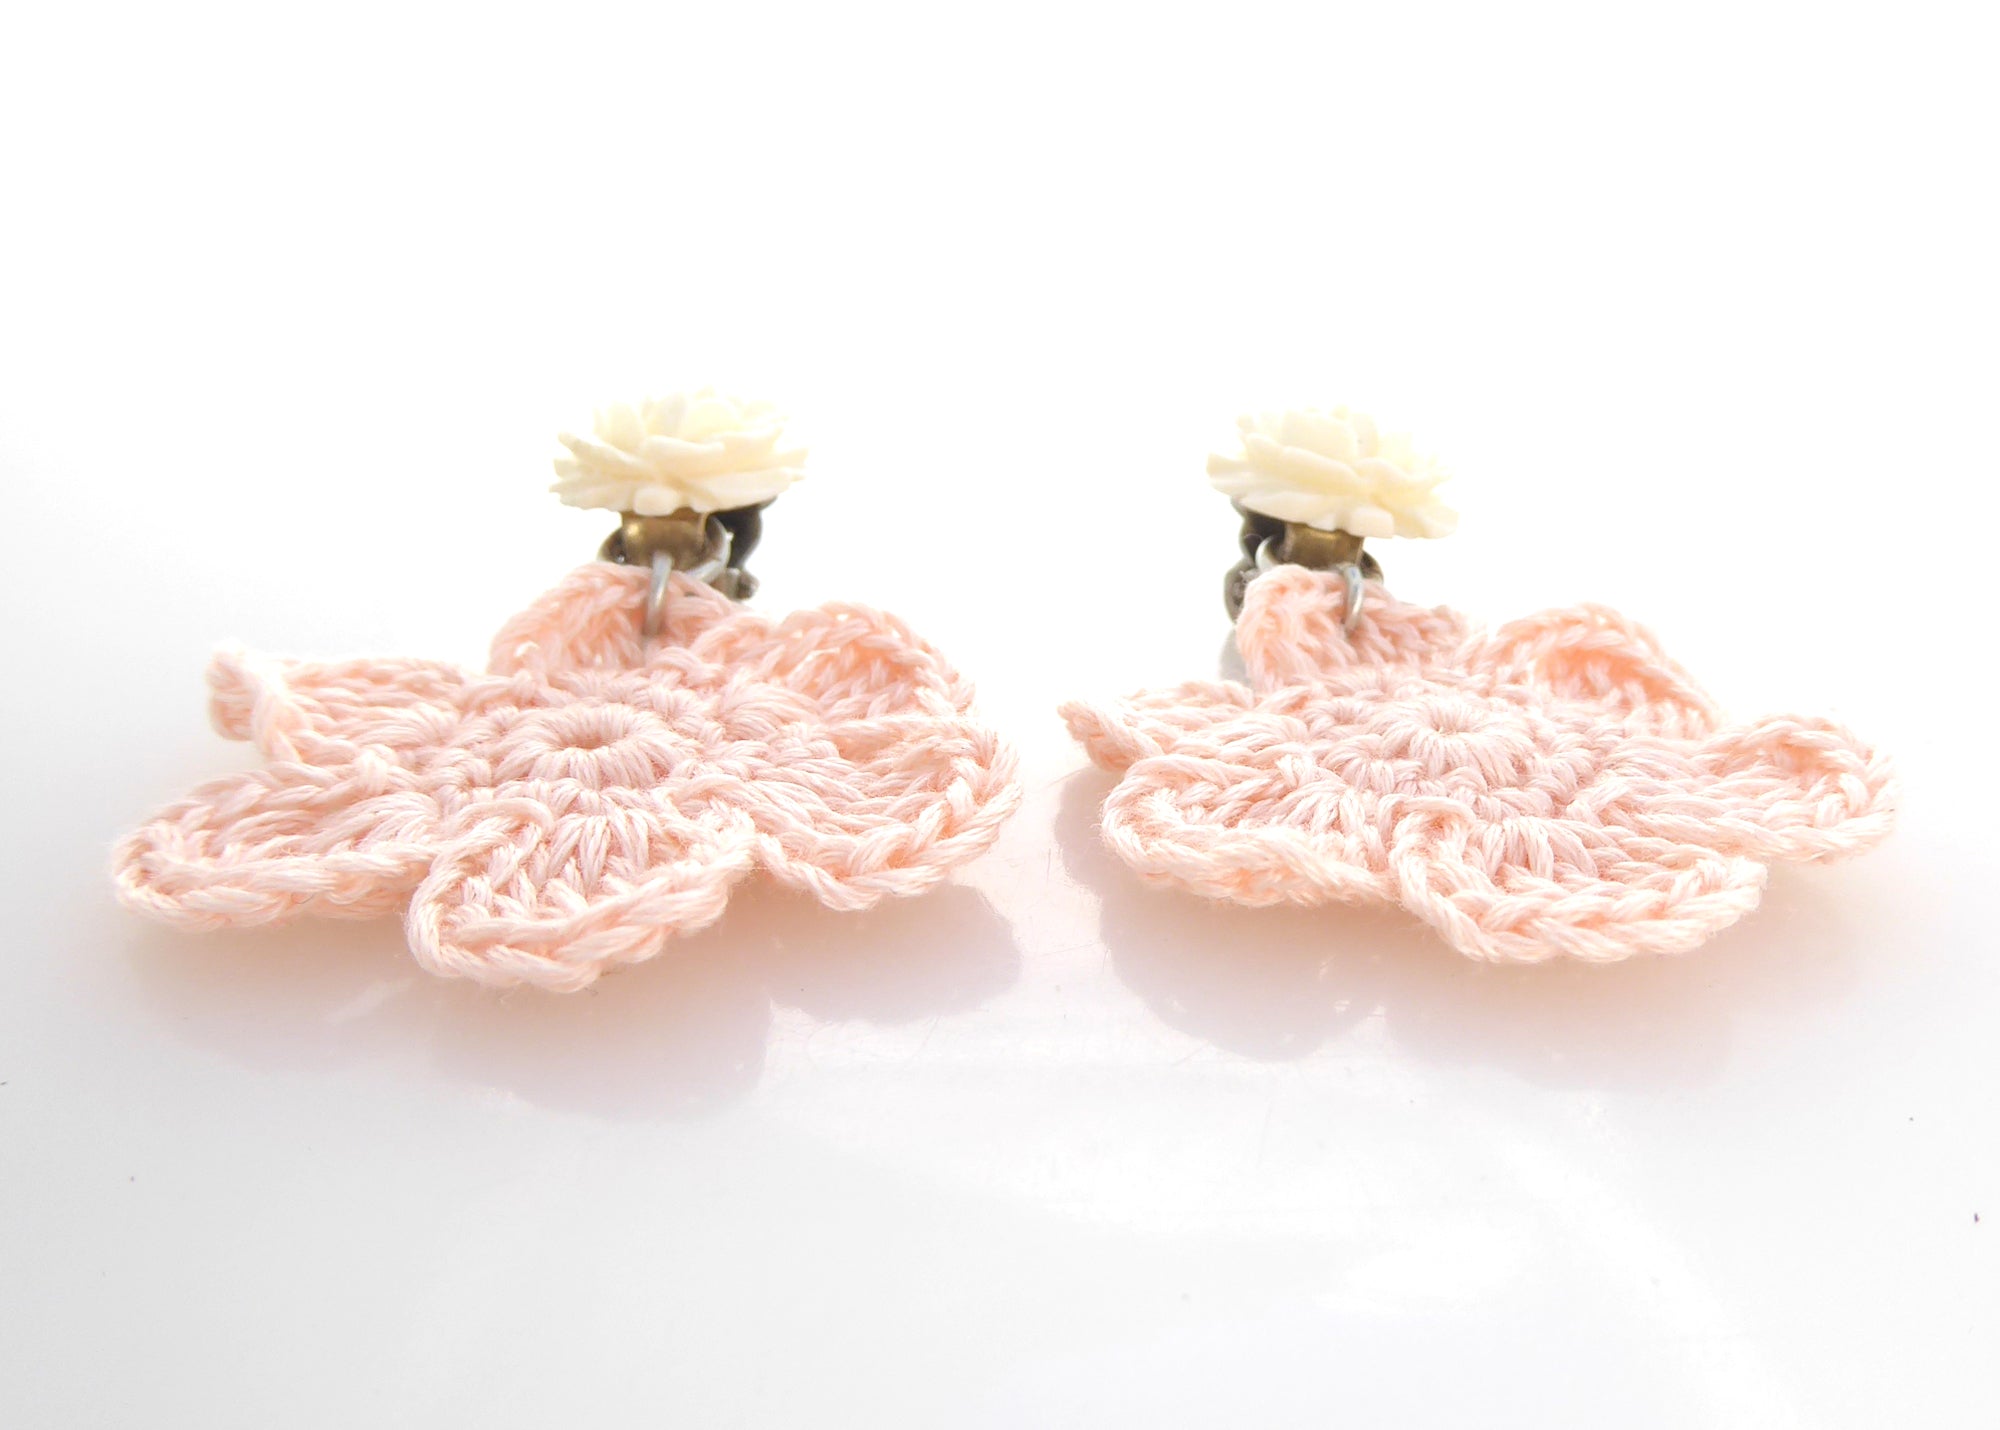 1950s celluloid rose and pale pink crochet flower earrings by Jenny Dayco 3